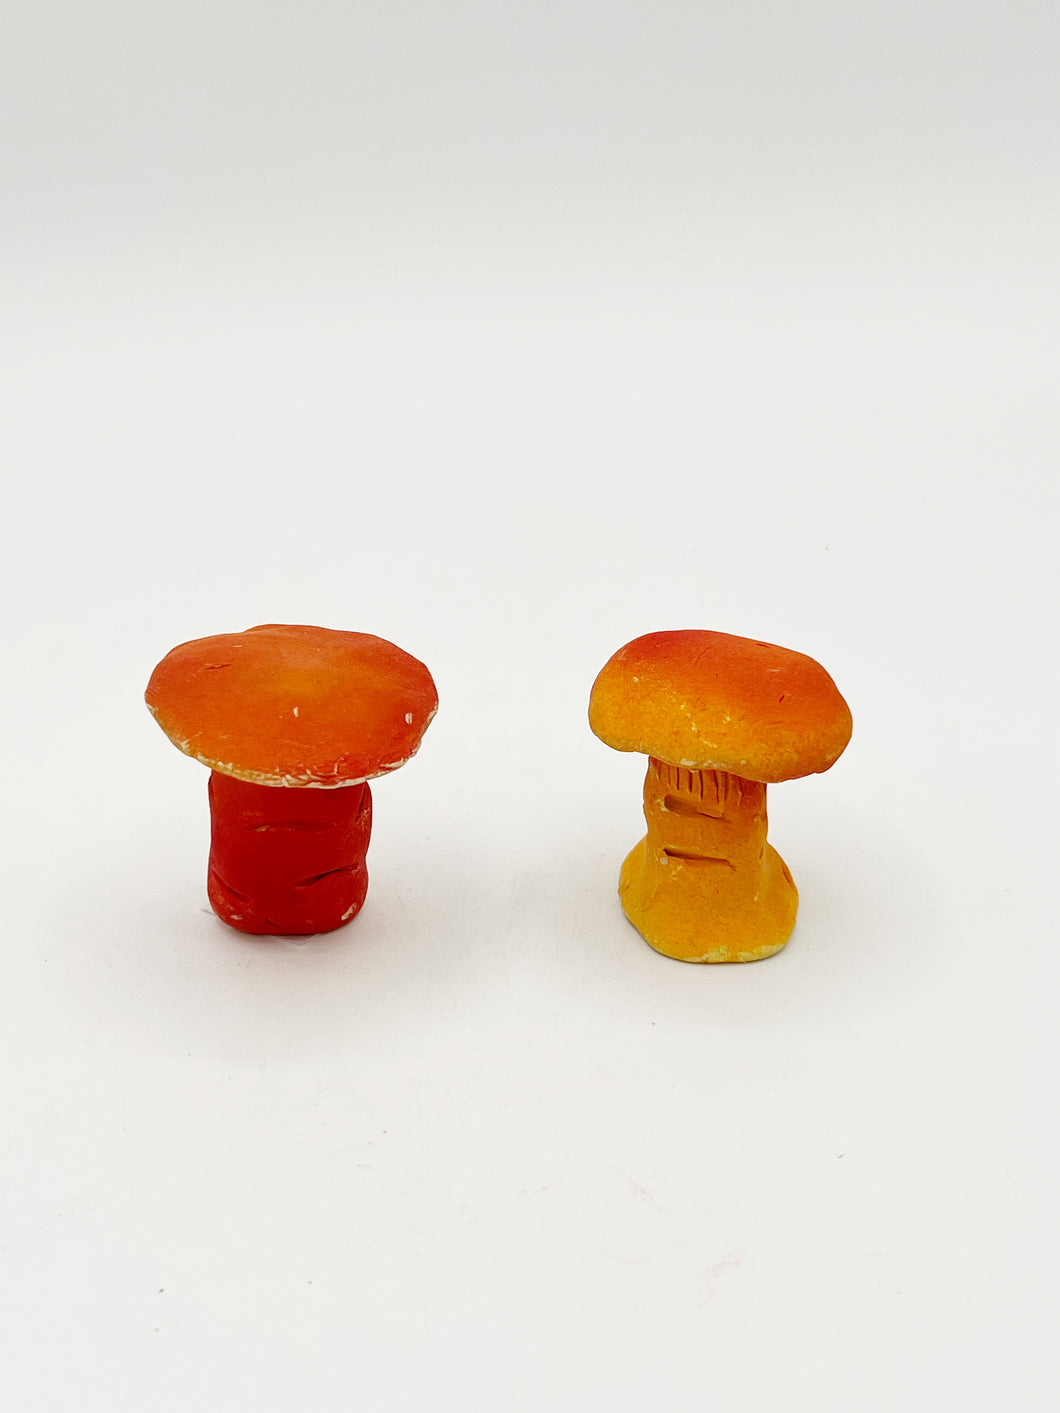 Mushroom collection: red and orange